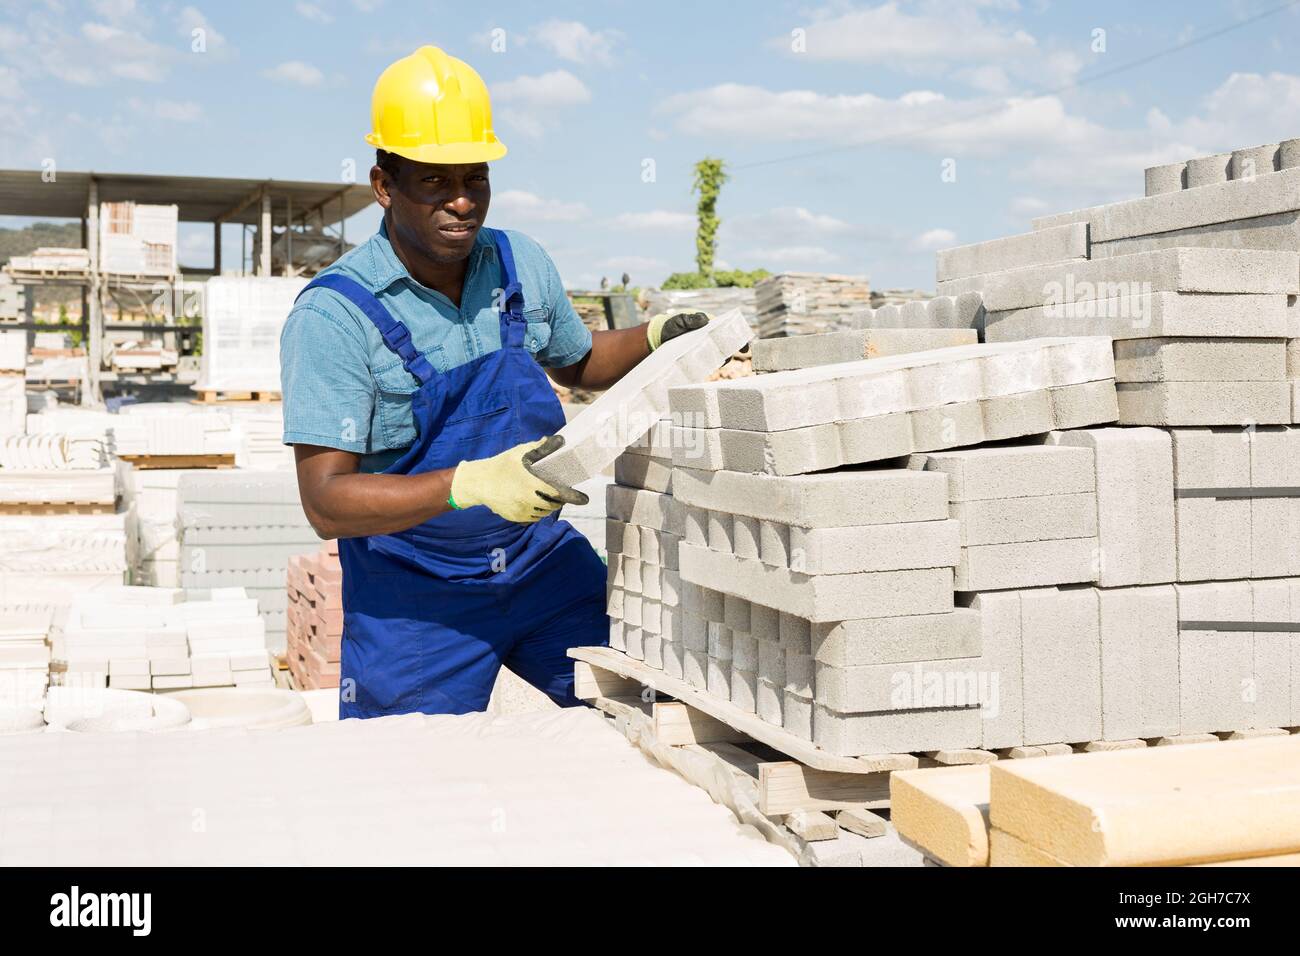 Builder carrying concrete block in outdoor warehouse Stock Photo